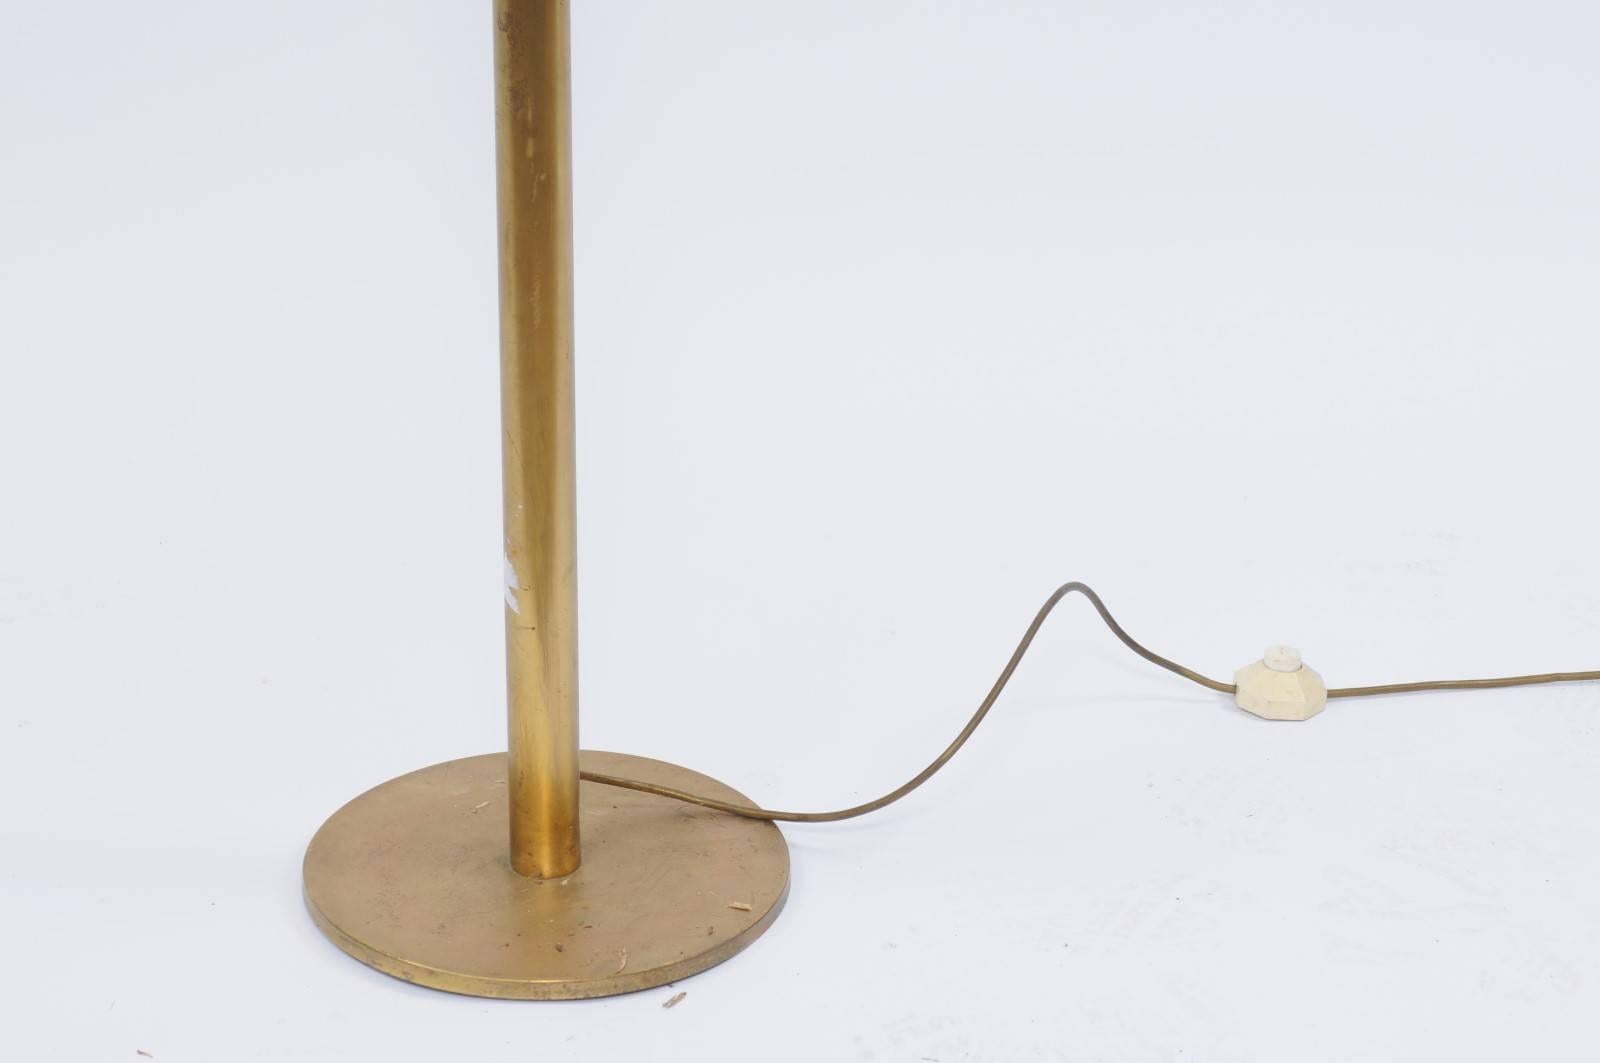 Vintage Italian Seven-Light Brass Floor Lamp with Arched Arms from the 1970s For Sale 2